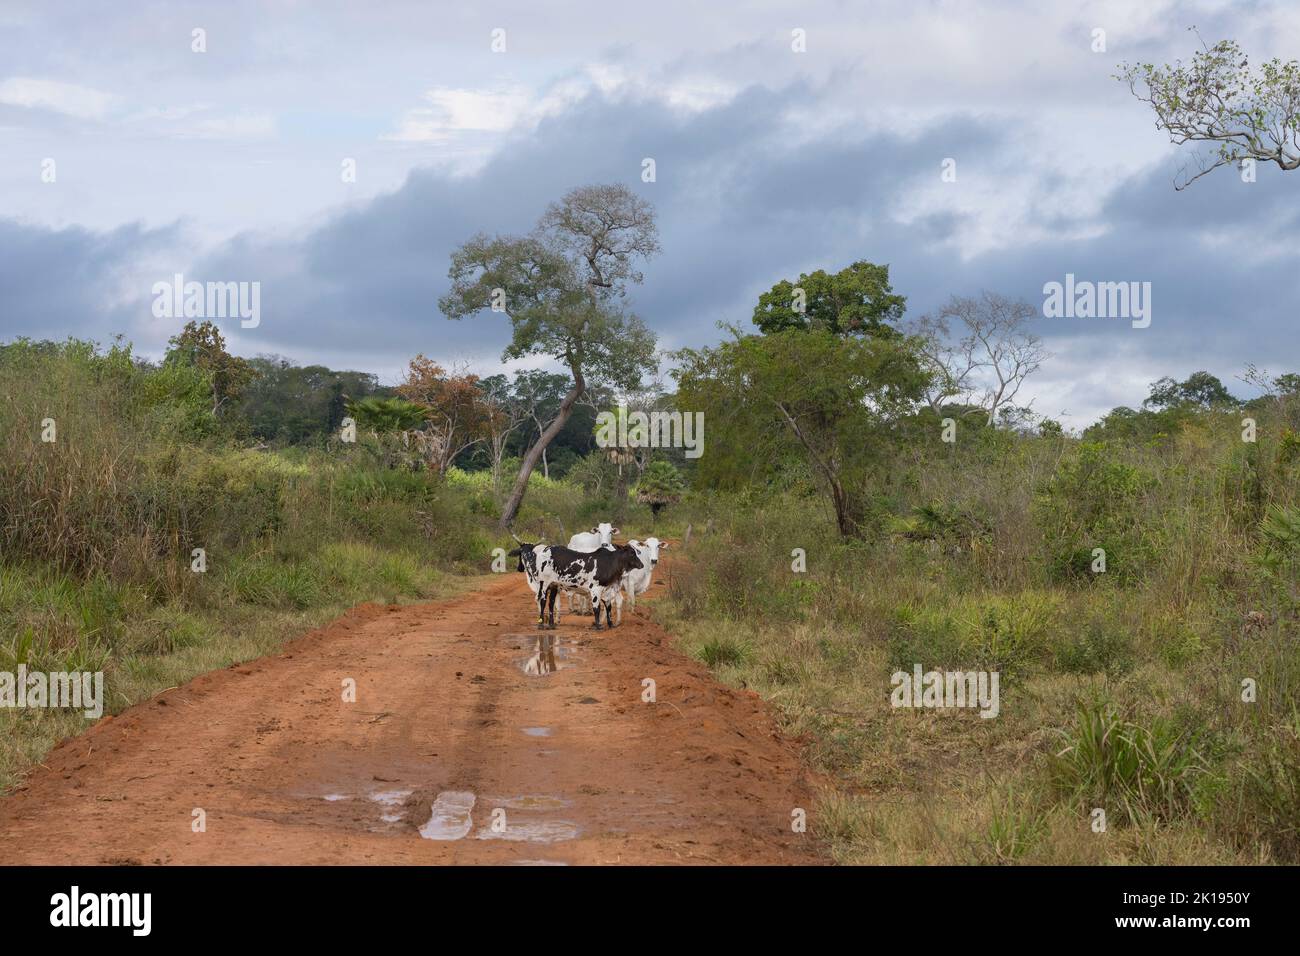 Nelore cattle on a dirt road near Baiazinha Lodge in the Northern Pantanal, State of Mato Grosso, Brazil. Stock Photo